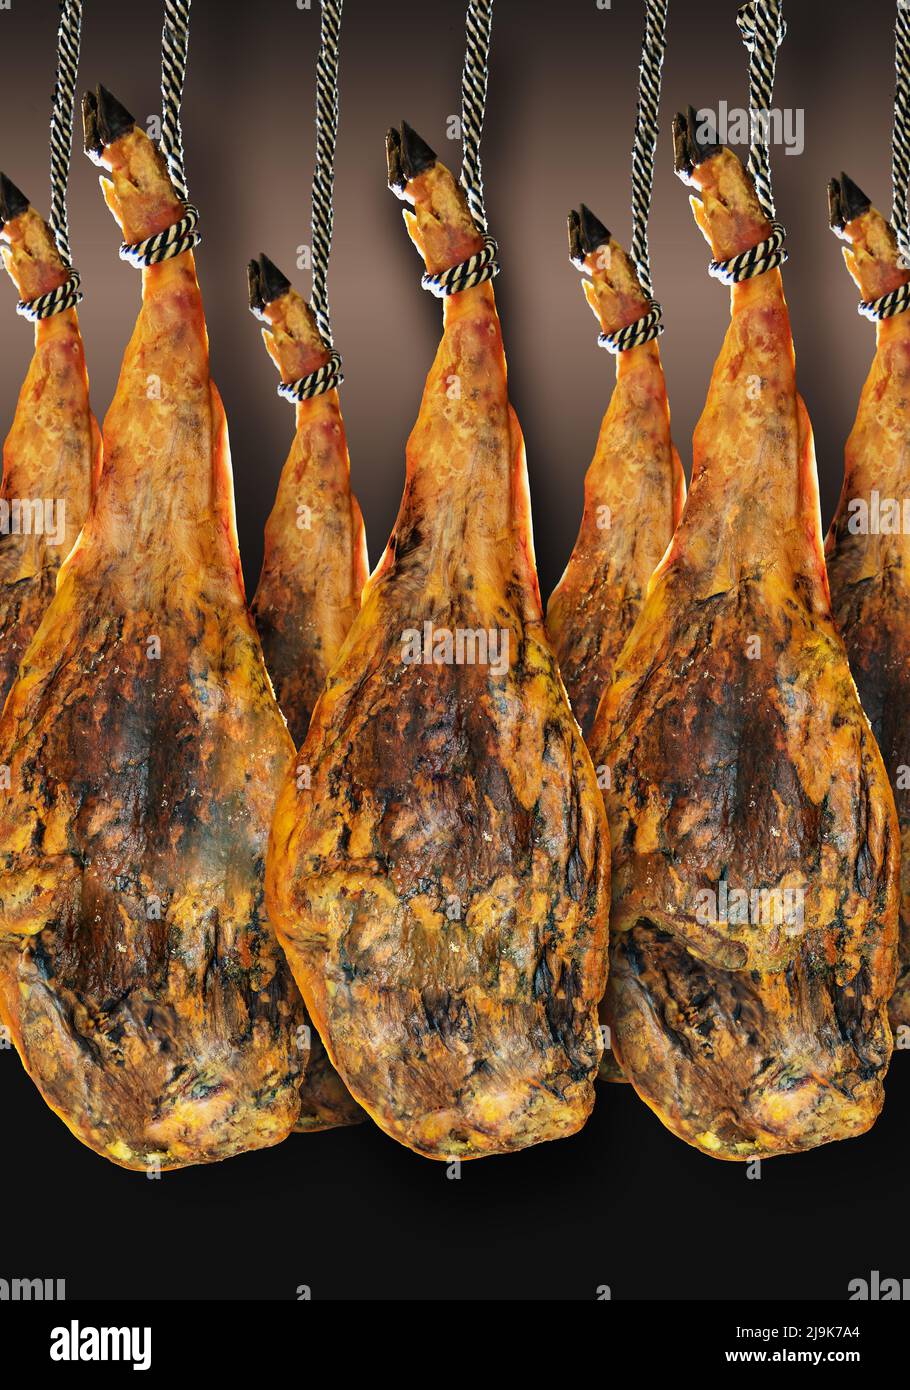 Whole leg of several Spanish Iberian serrano ham hanging on a rope, isolated on a stylish gradient background. Stock Photo